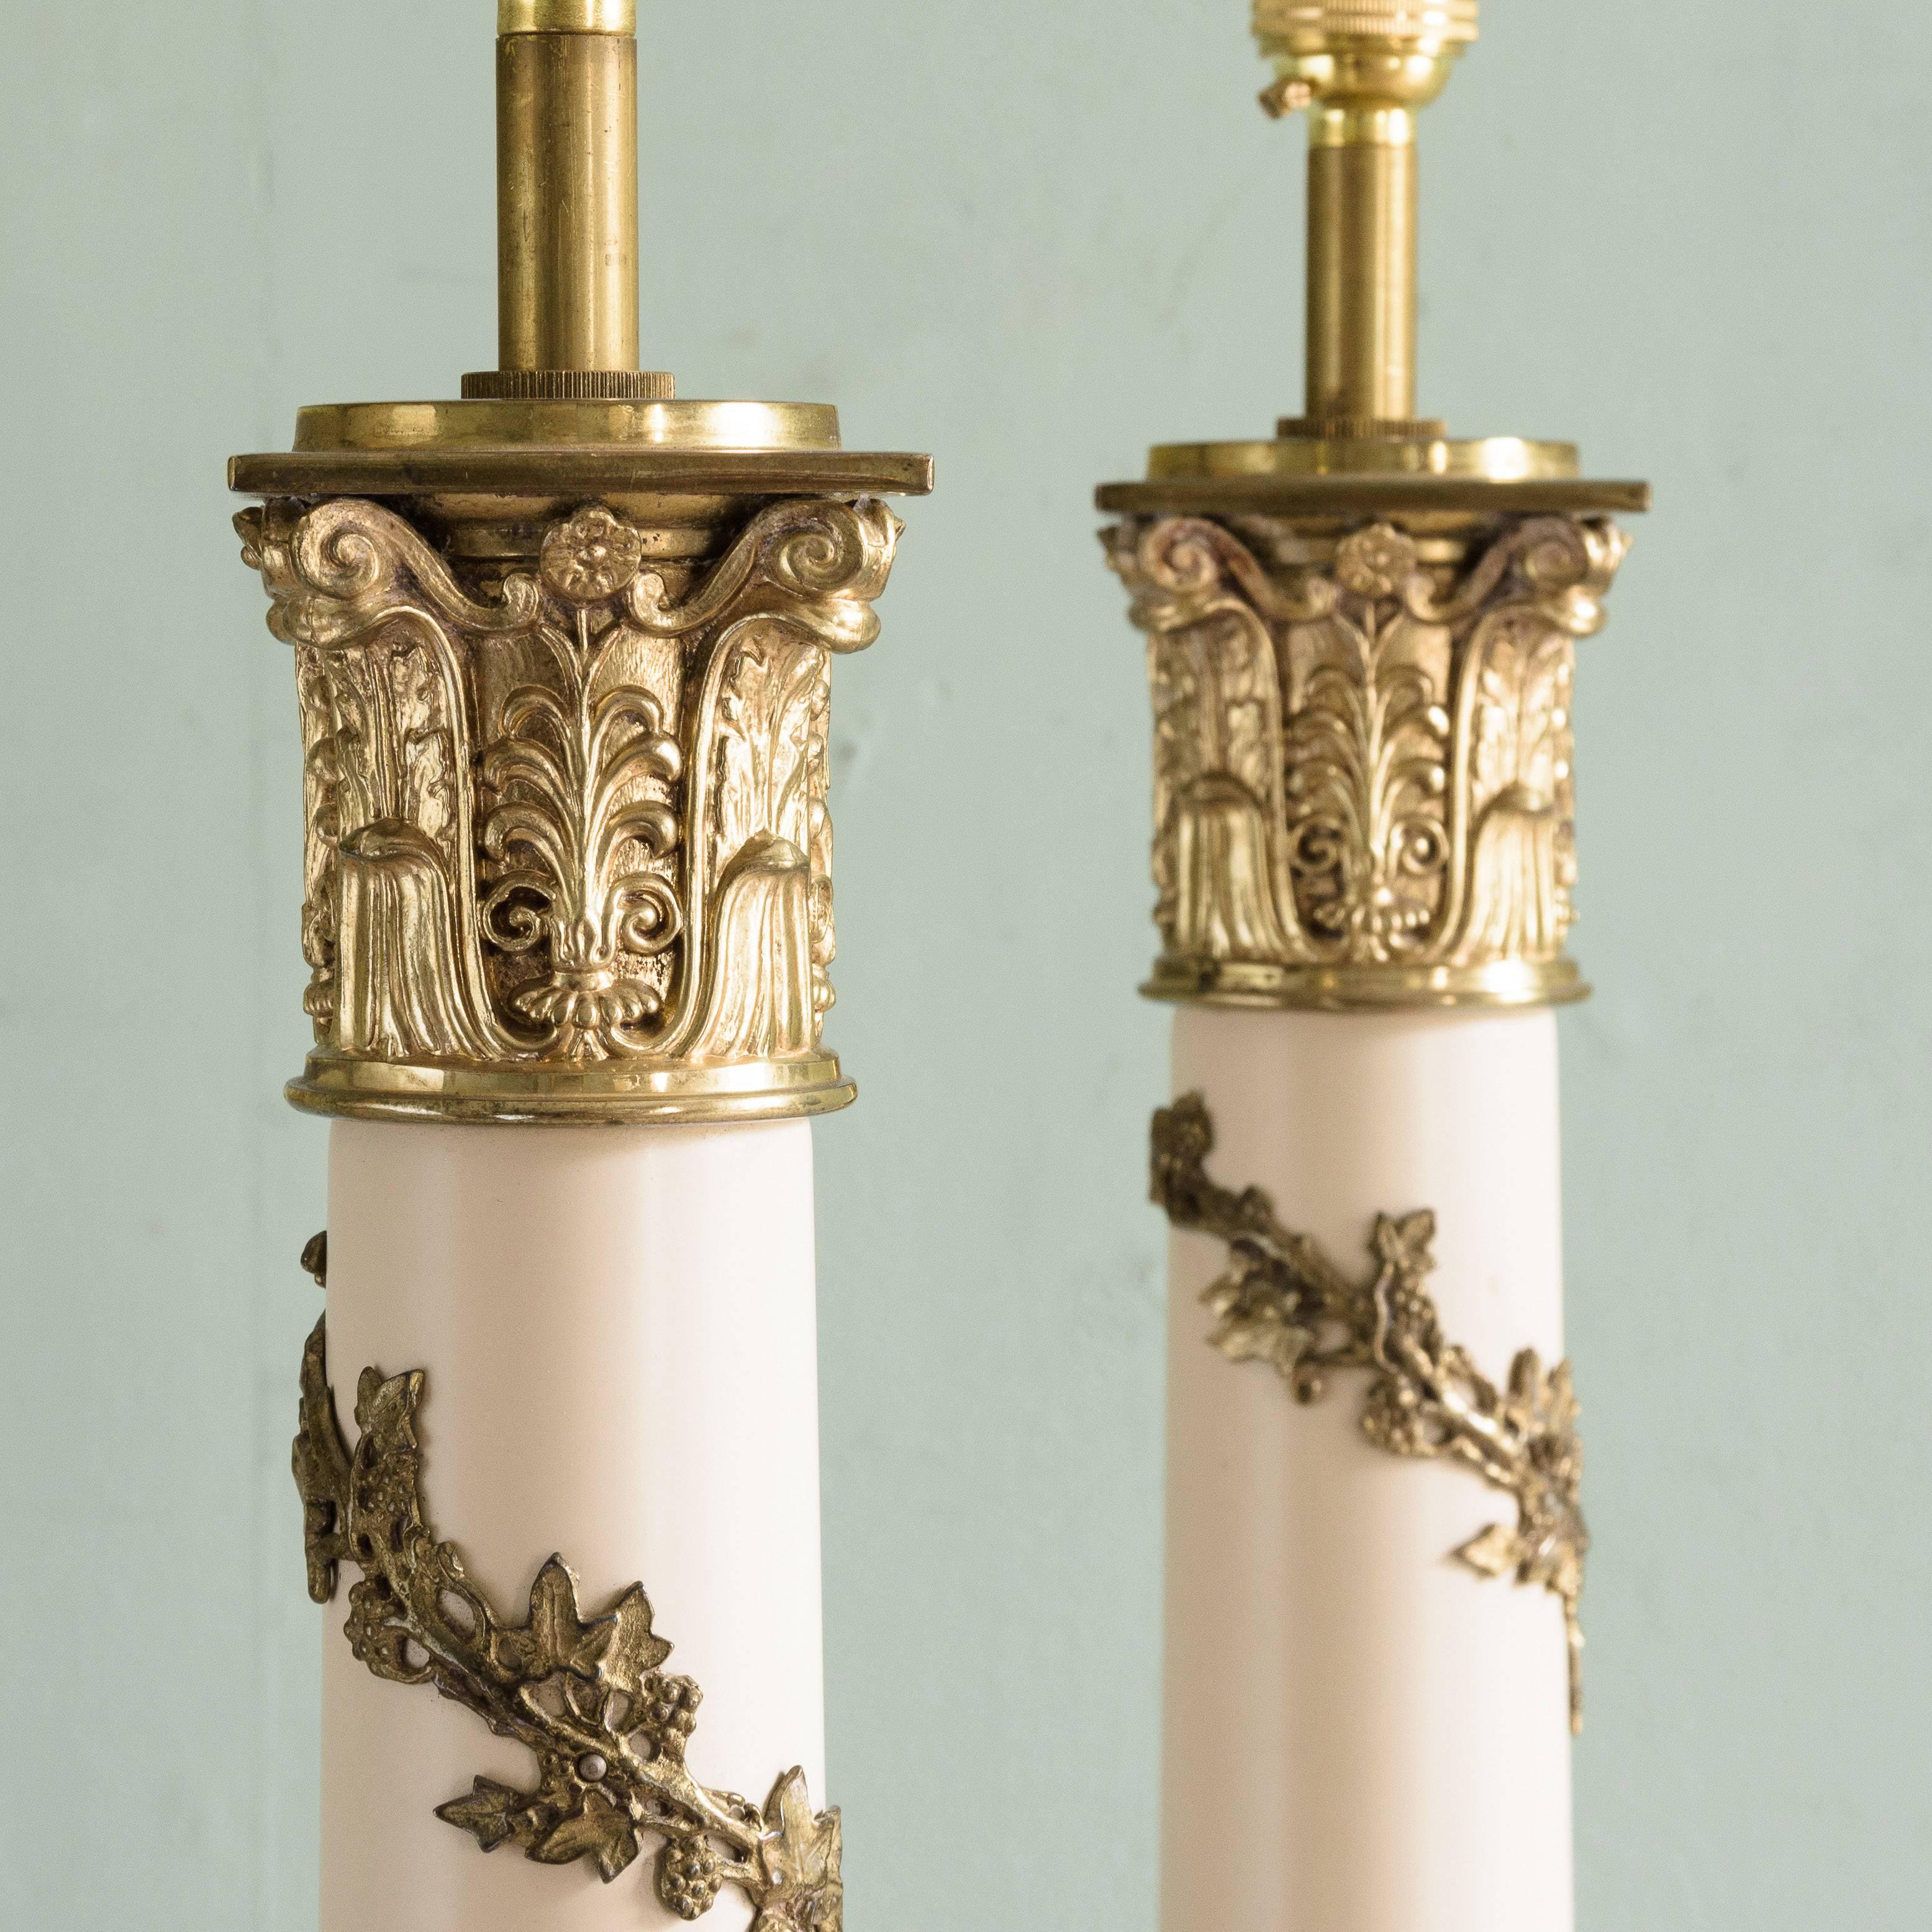 Pair of Corinthian column table lamps, mid-20th century, brass with trailing vine decoration to the shaft, on stepped plinth base. Shades included.